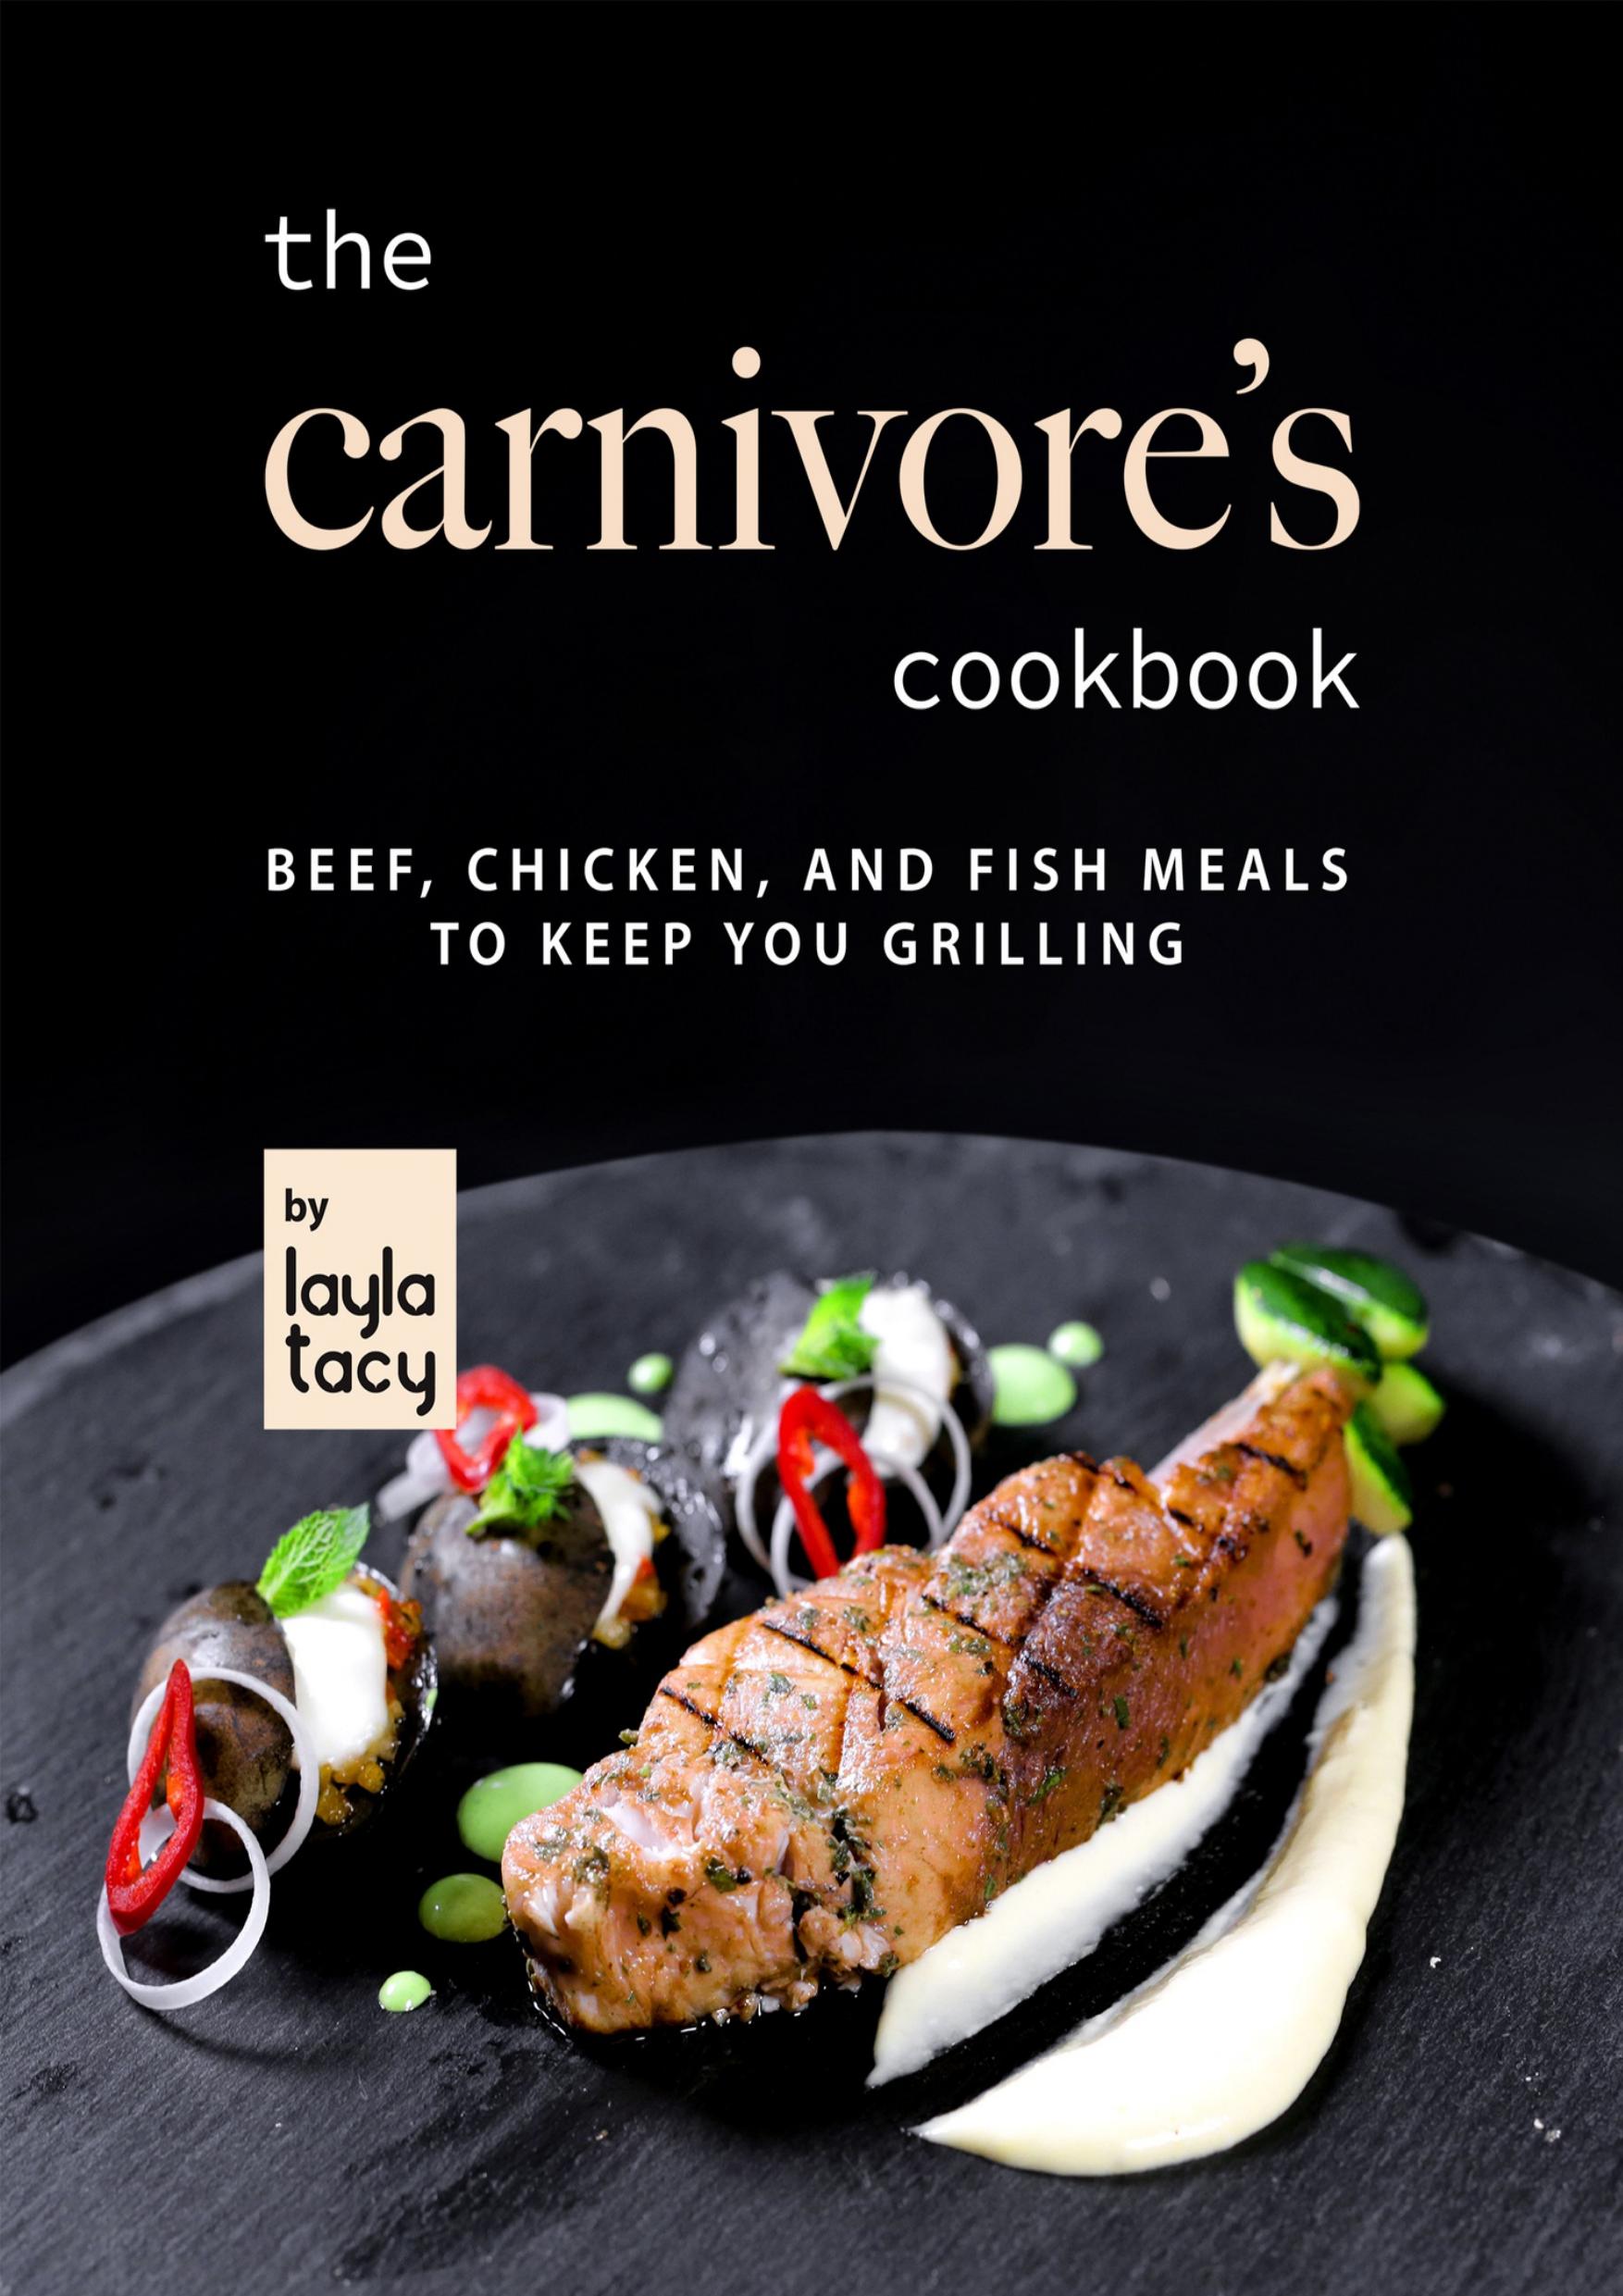 The Carnivore's Cookbook: Beef, Chicken, and Fish Meals to Keep You Grilling by Tacy Layla